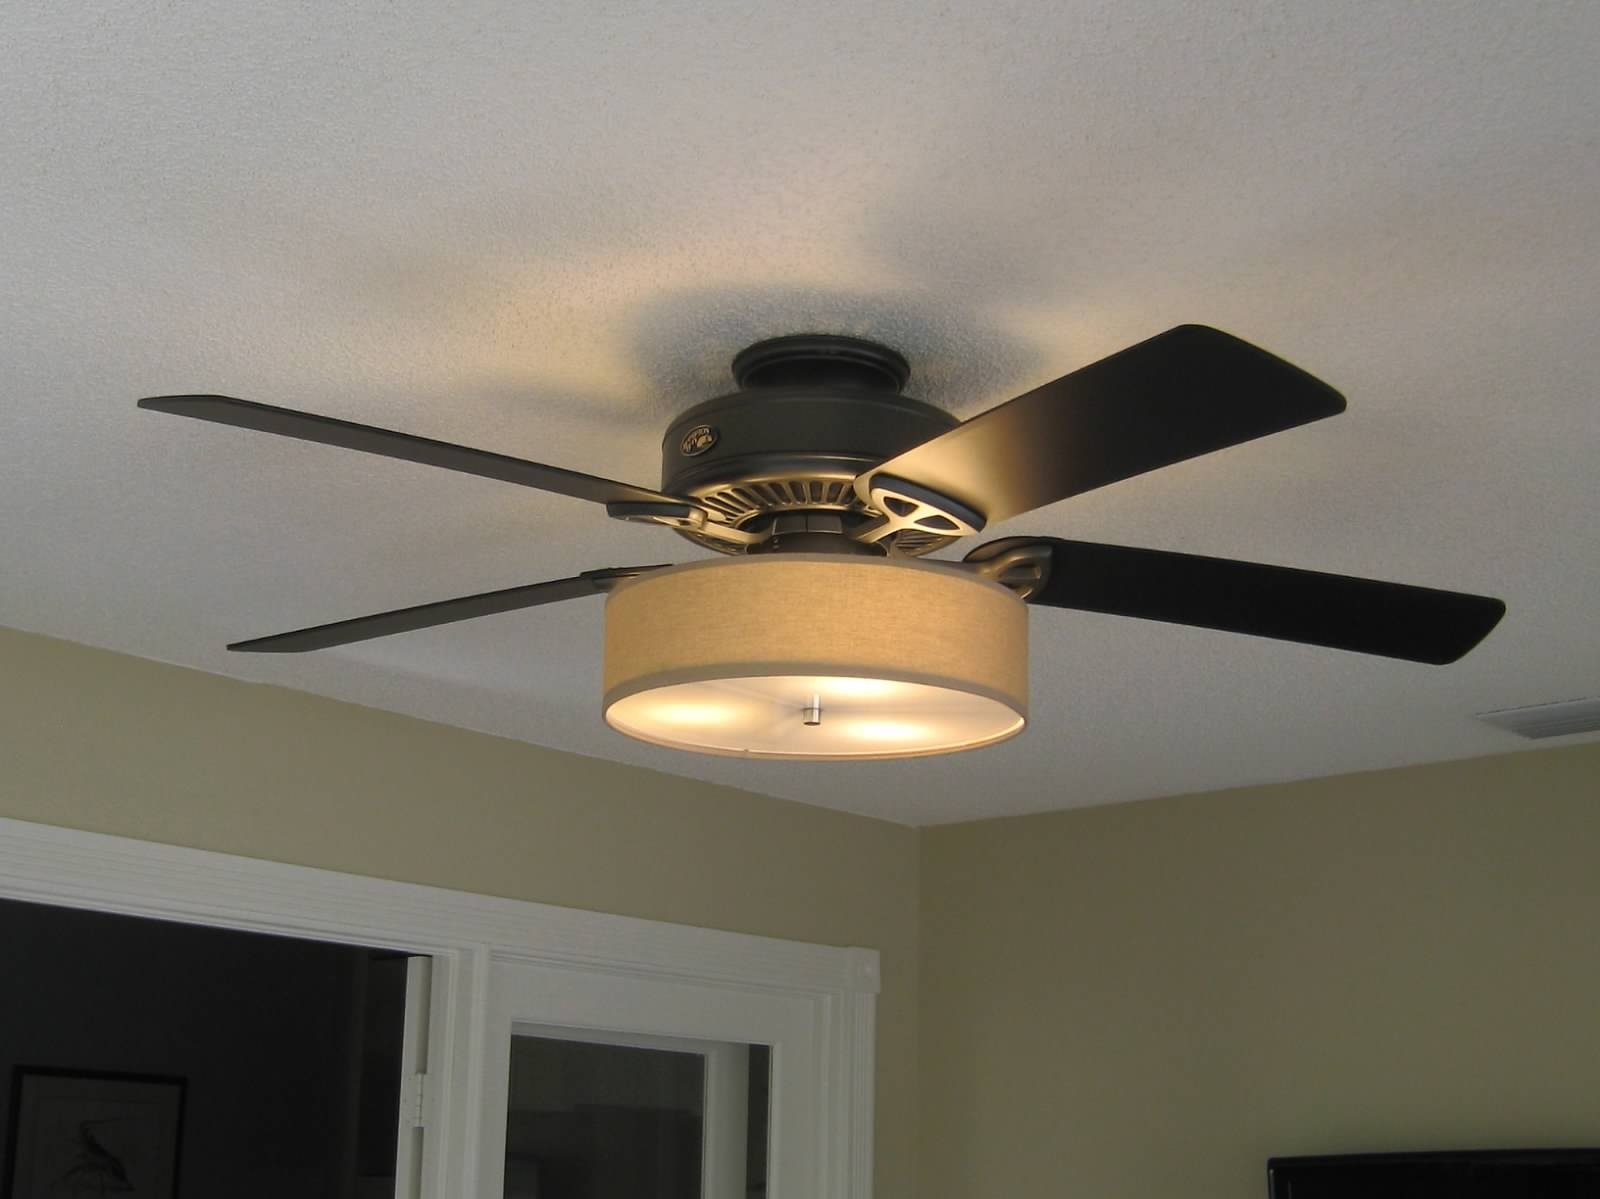 Permalink to Light Fans Ceiling Fixtures